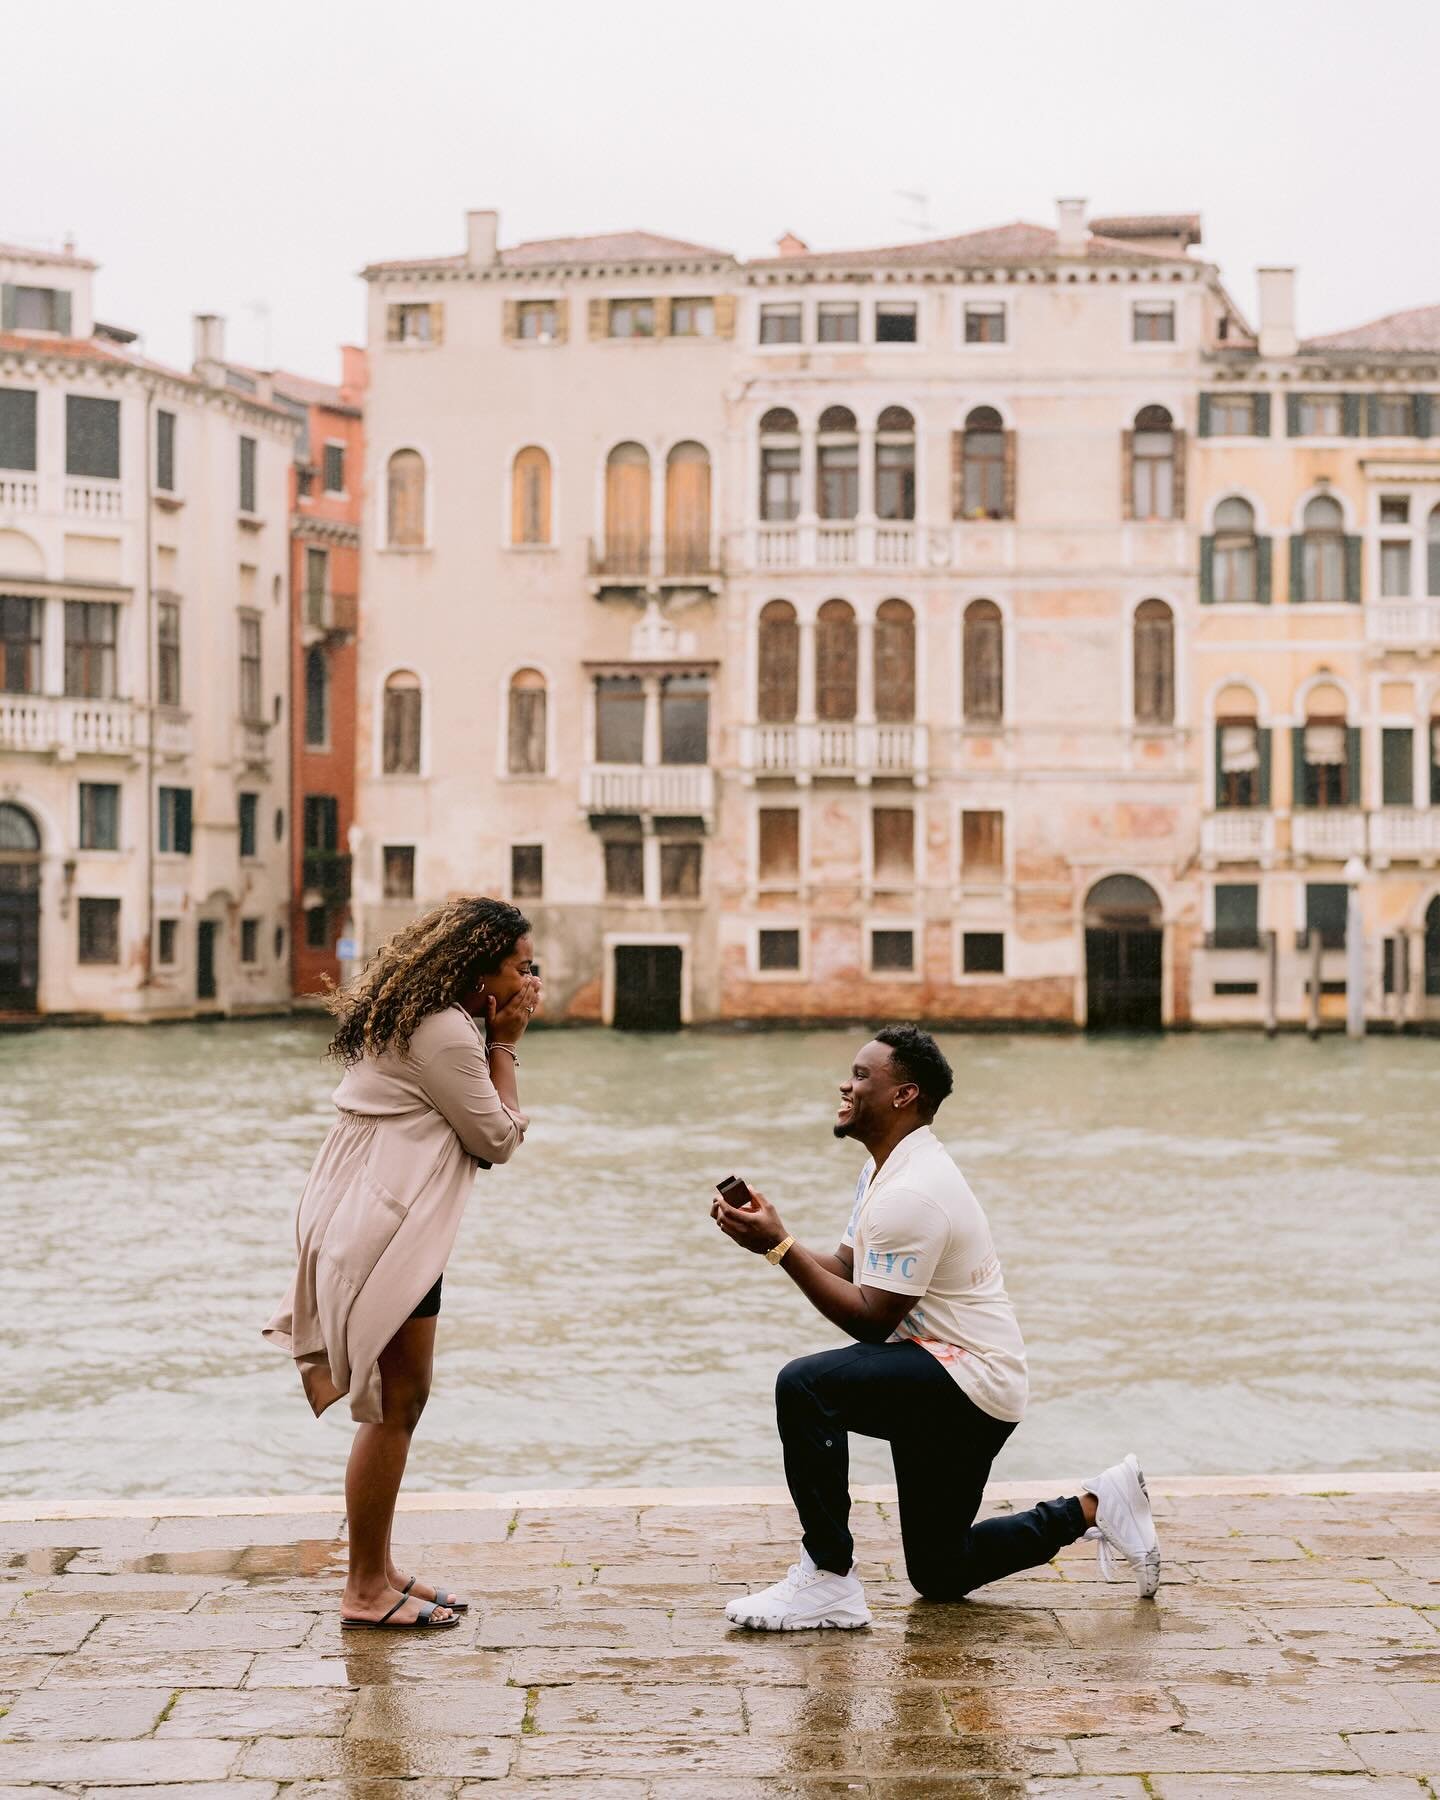 Braving the bad weather with a ring and a yes 💍 

&bull;
&bull;
&bull;

#venicephotographer#destinationweddingphotographer#engagement#engagementitaly#engagementvenice#proposalvenice#veniceweddingphotographer#veniceweddingphotoshoot#veniceweddingphot